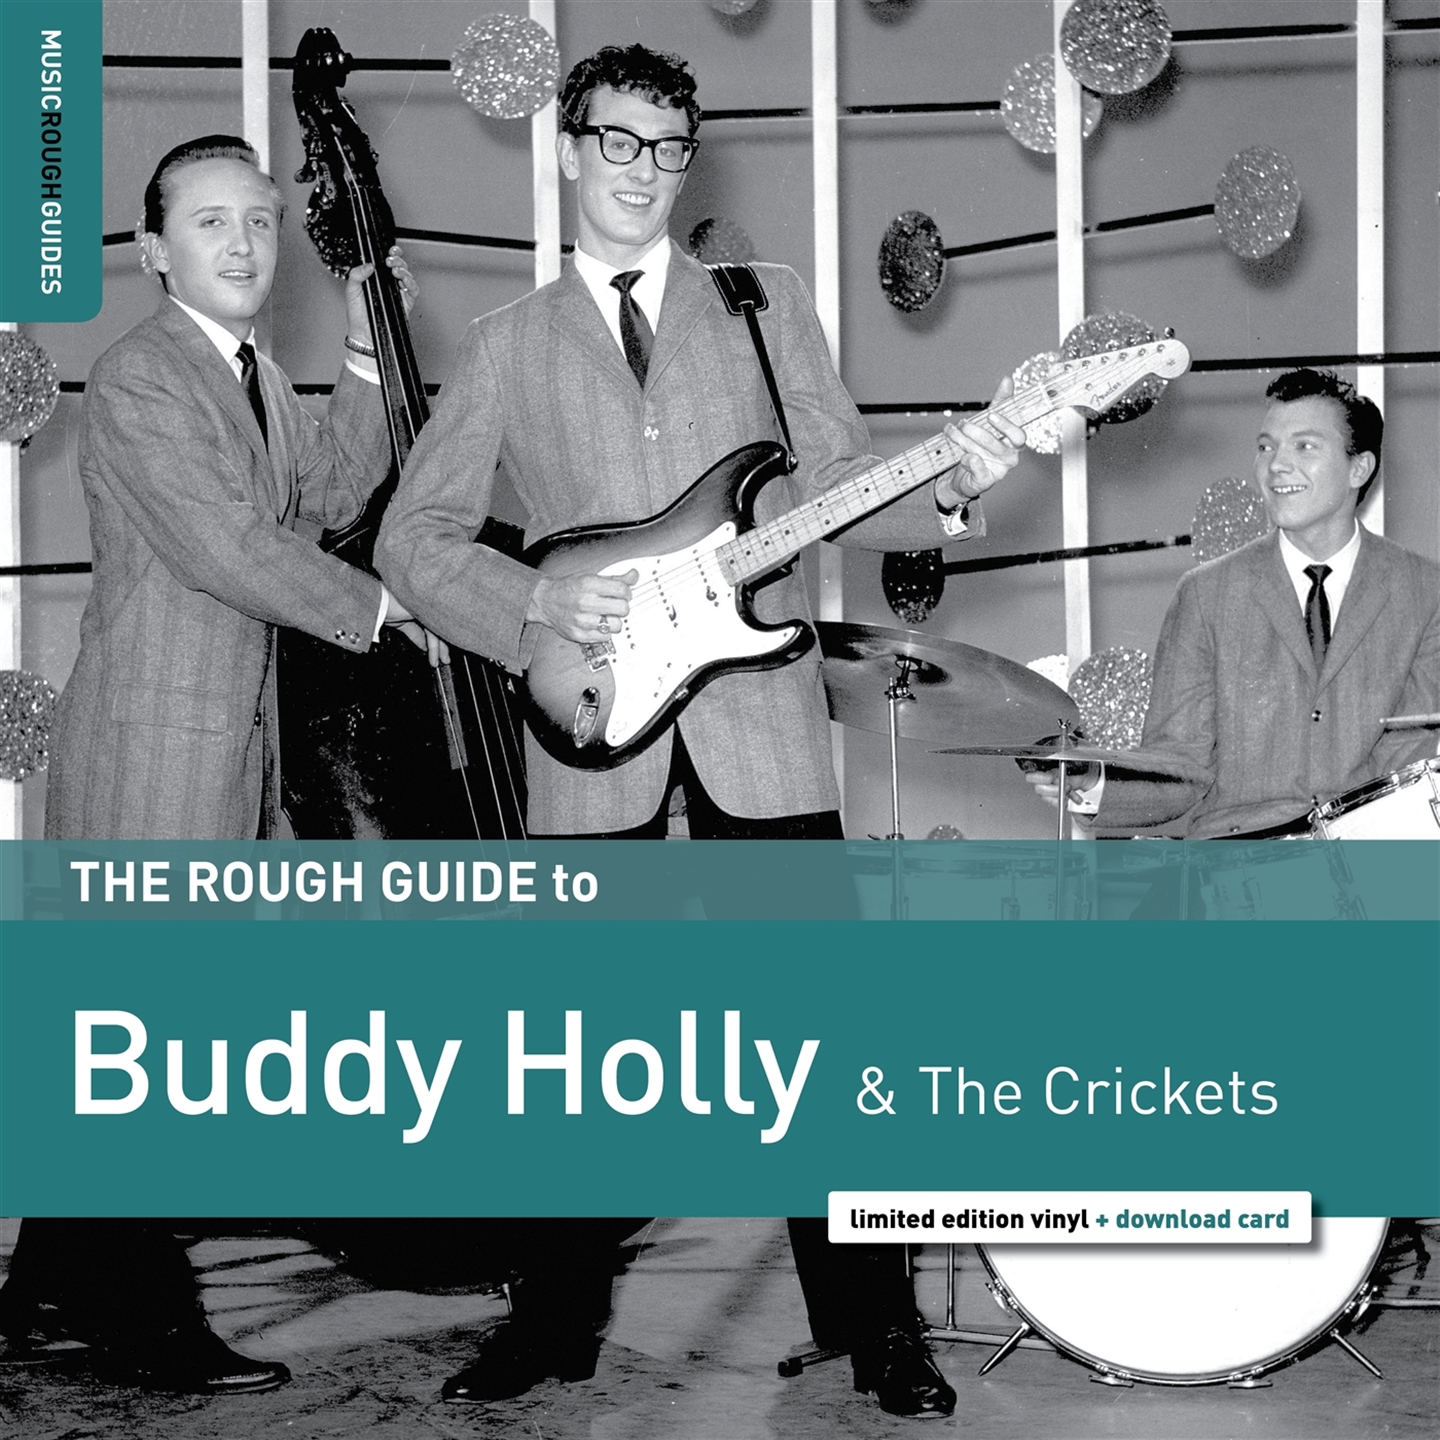 THE ROUGH GUIDE TO BUDDY HOLLY [LP]